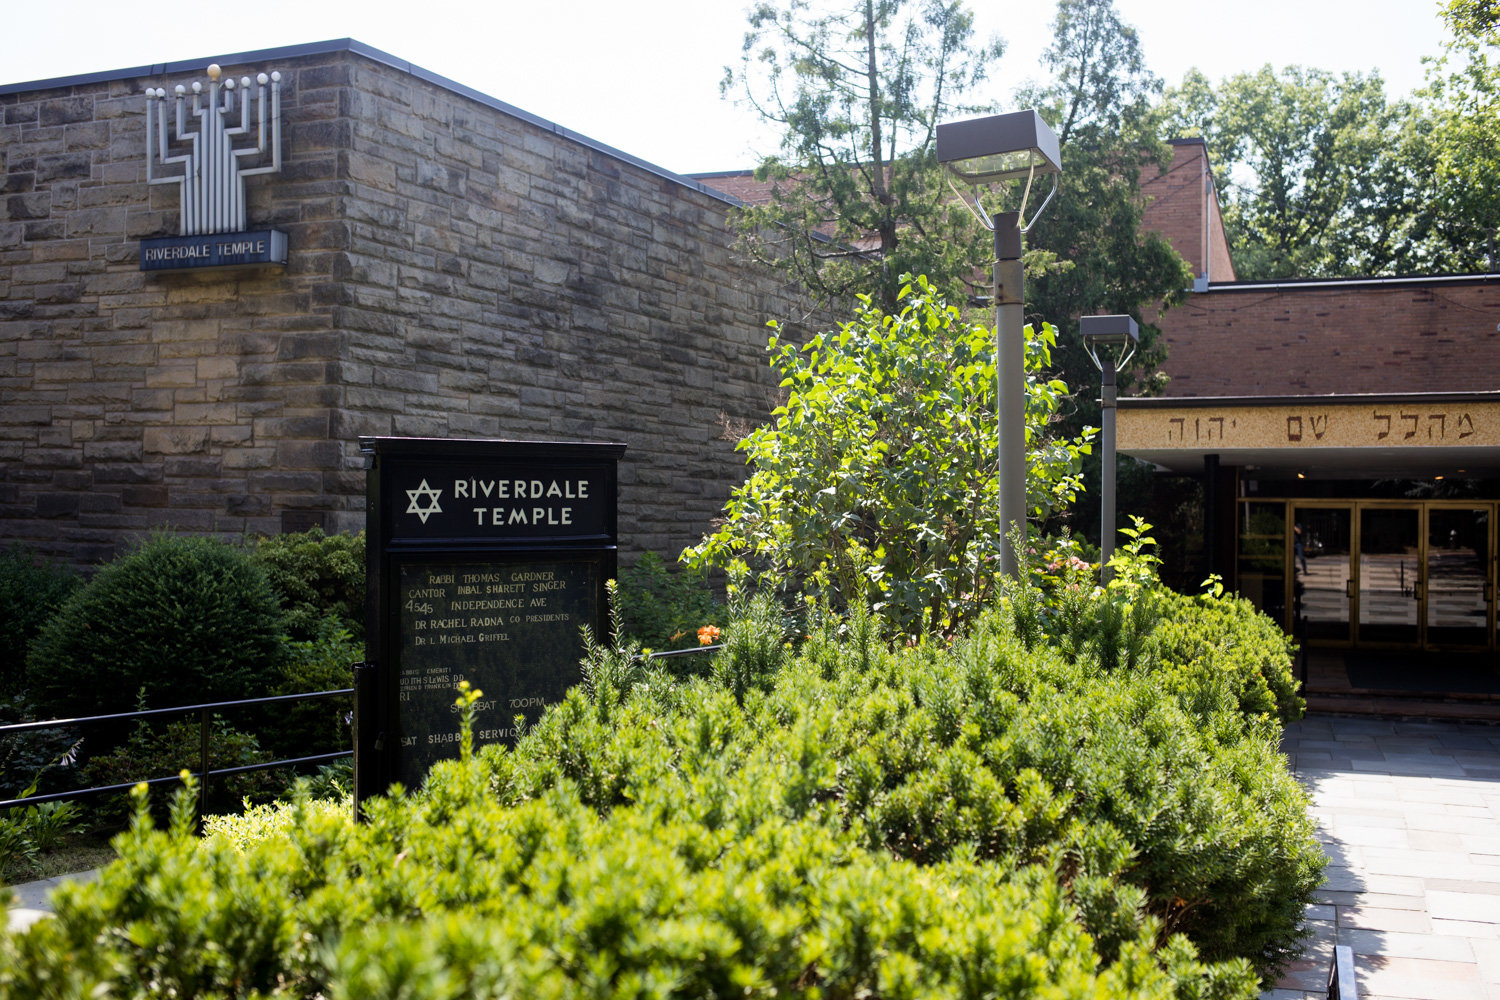 Riverdale Temple is waiting for word from the city’s health department to determine if it can hold an in-person summer camp. If summer camp cannot take place, there will be plans for interactive activities over Zoom.